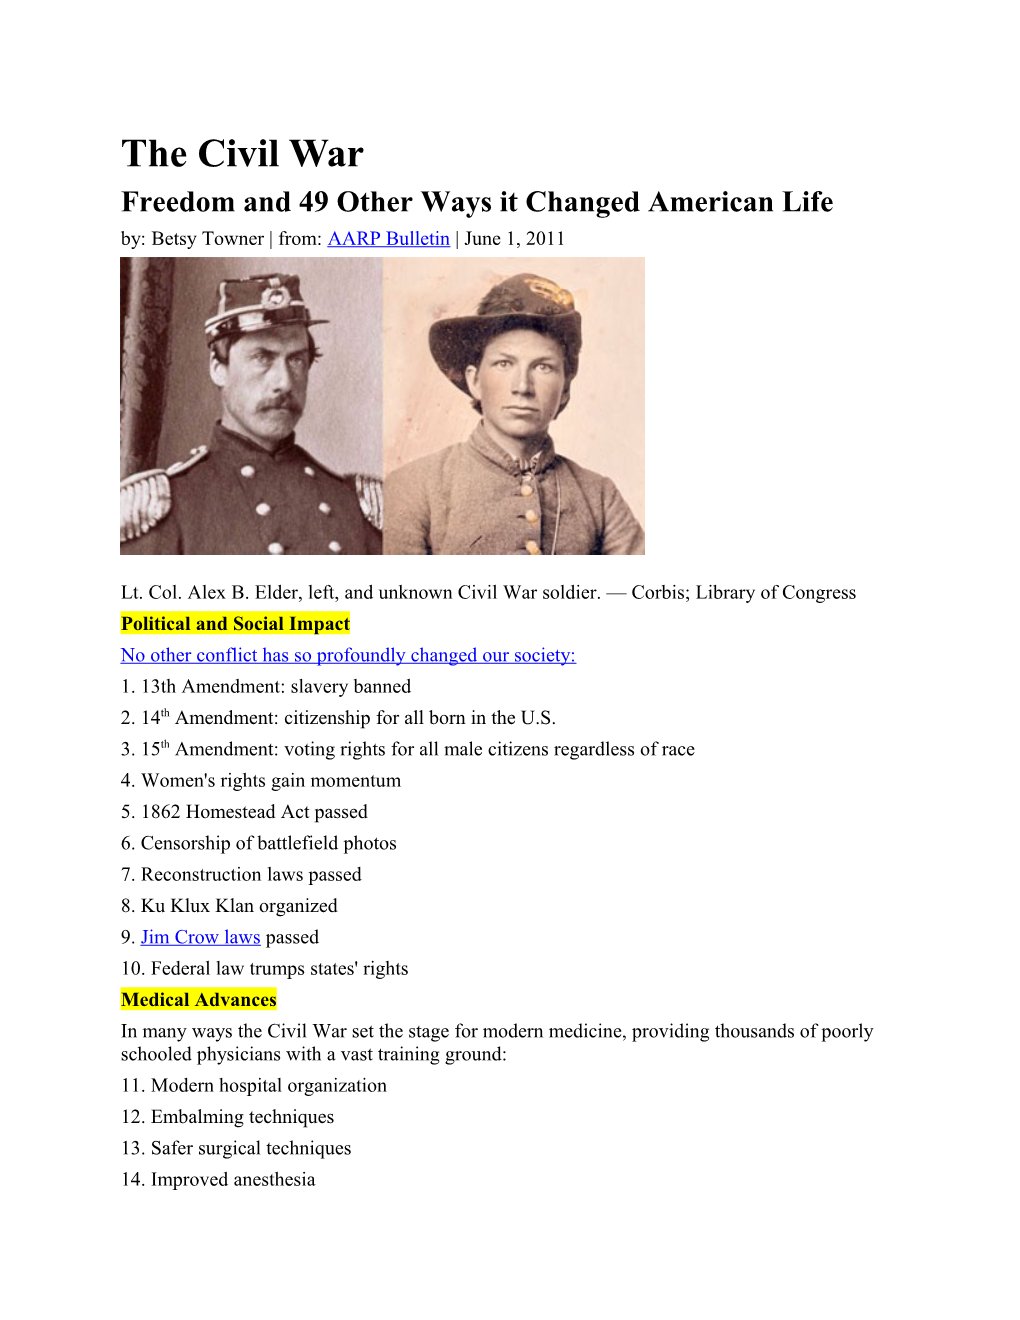 Freedom and 49 Other Ways It Changed American Life